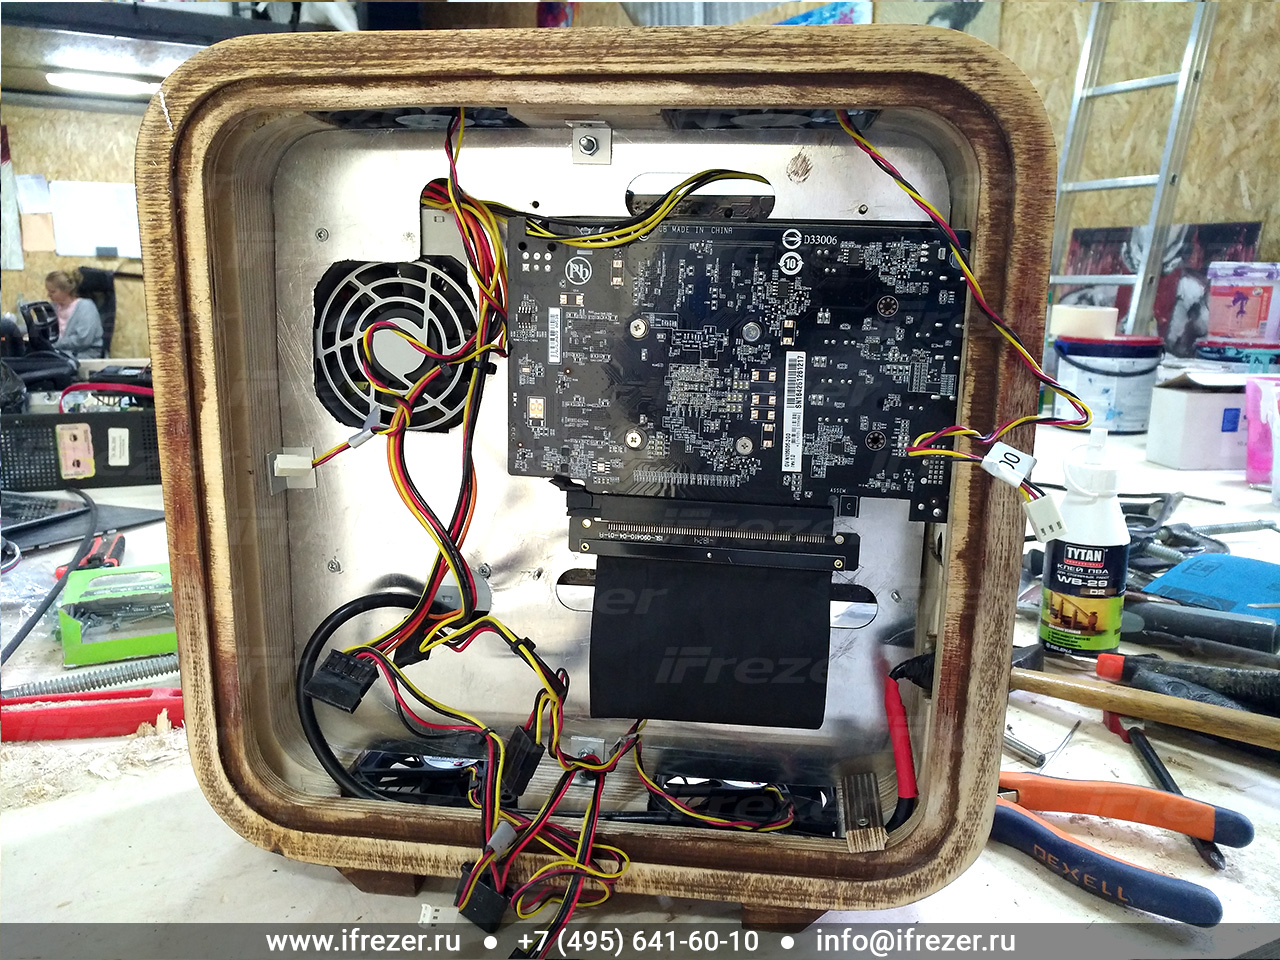 PC cases made of plywood